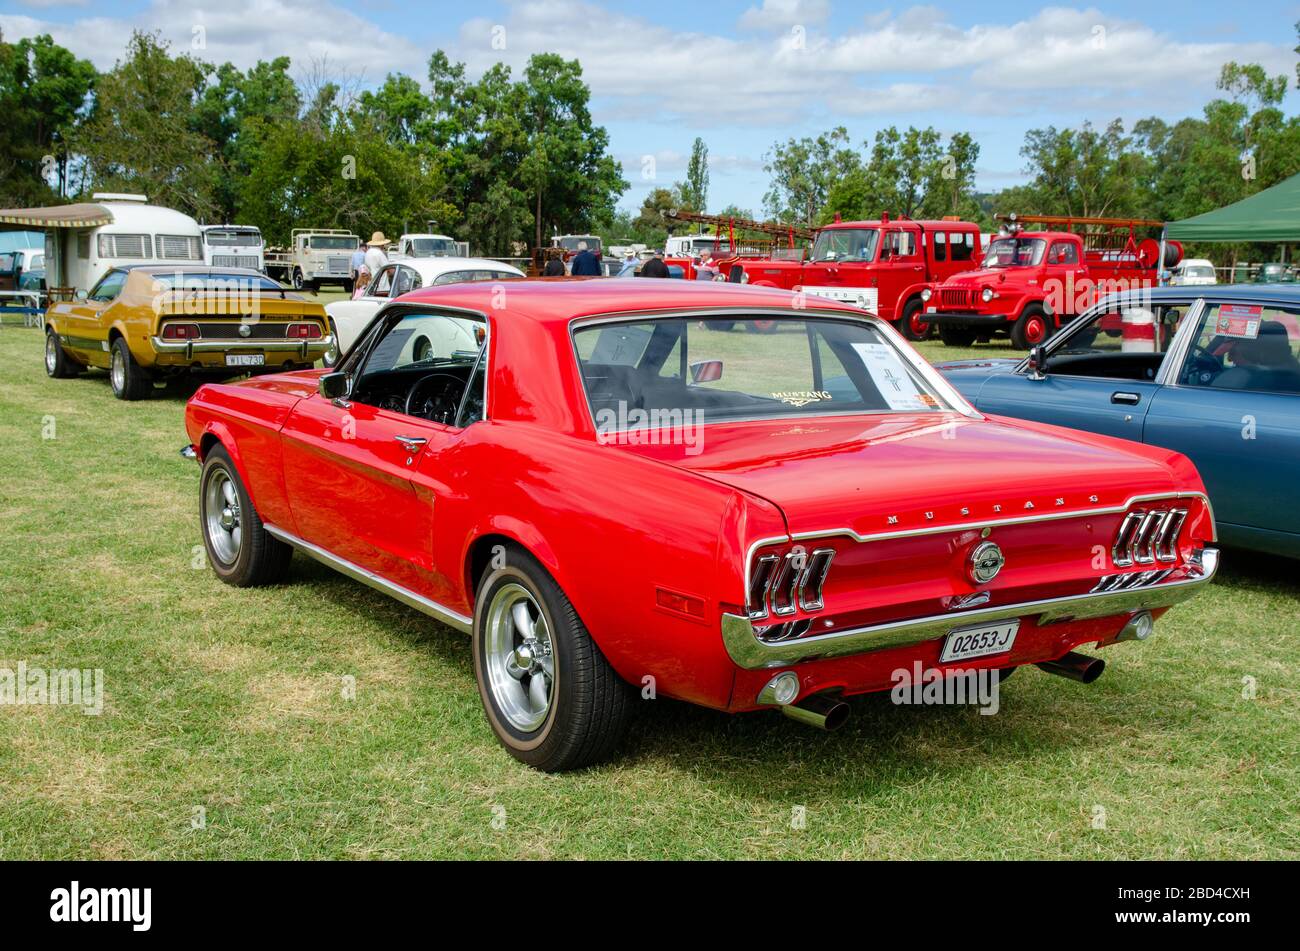 Bright Red 1968 Ford Mustang V8 First Generation Hardtop Coupe. Stock Photo